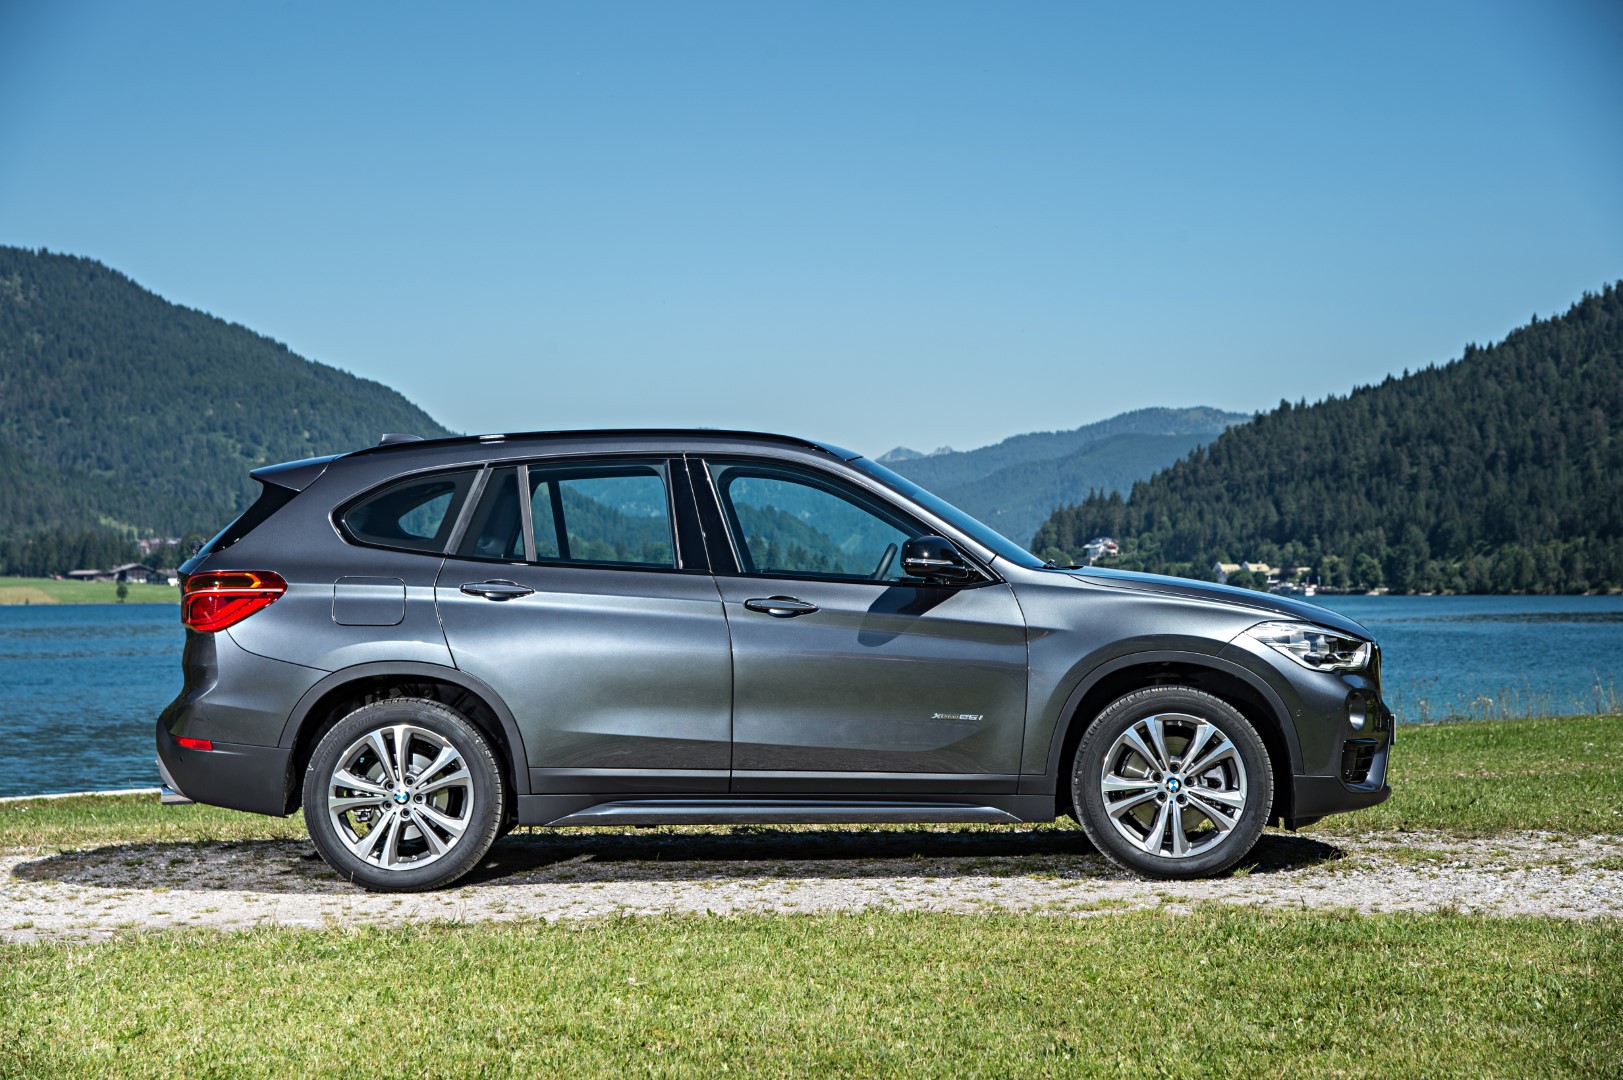 1554707771P90190752-highRes-the-new-bmw-x1-on-lo.jpg